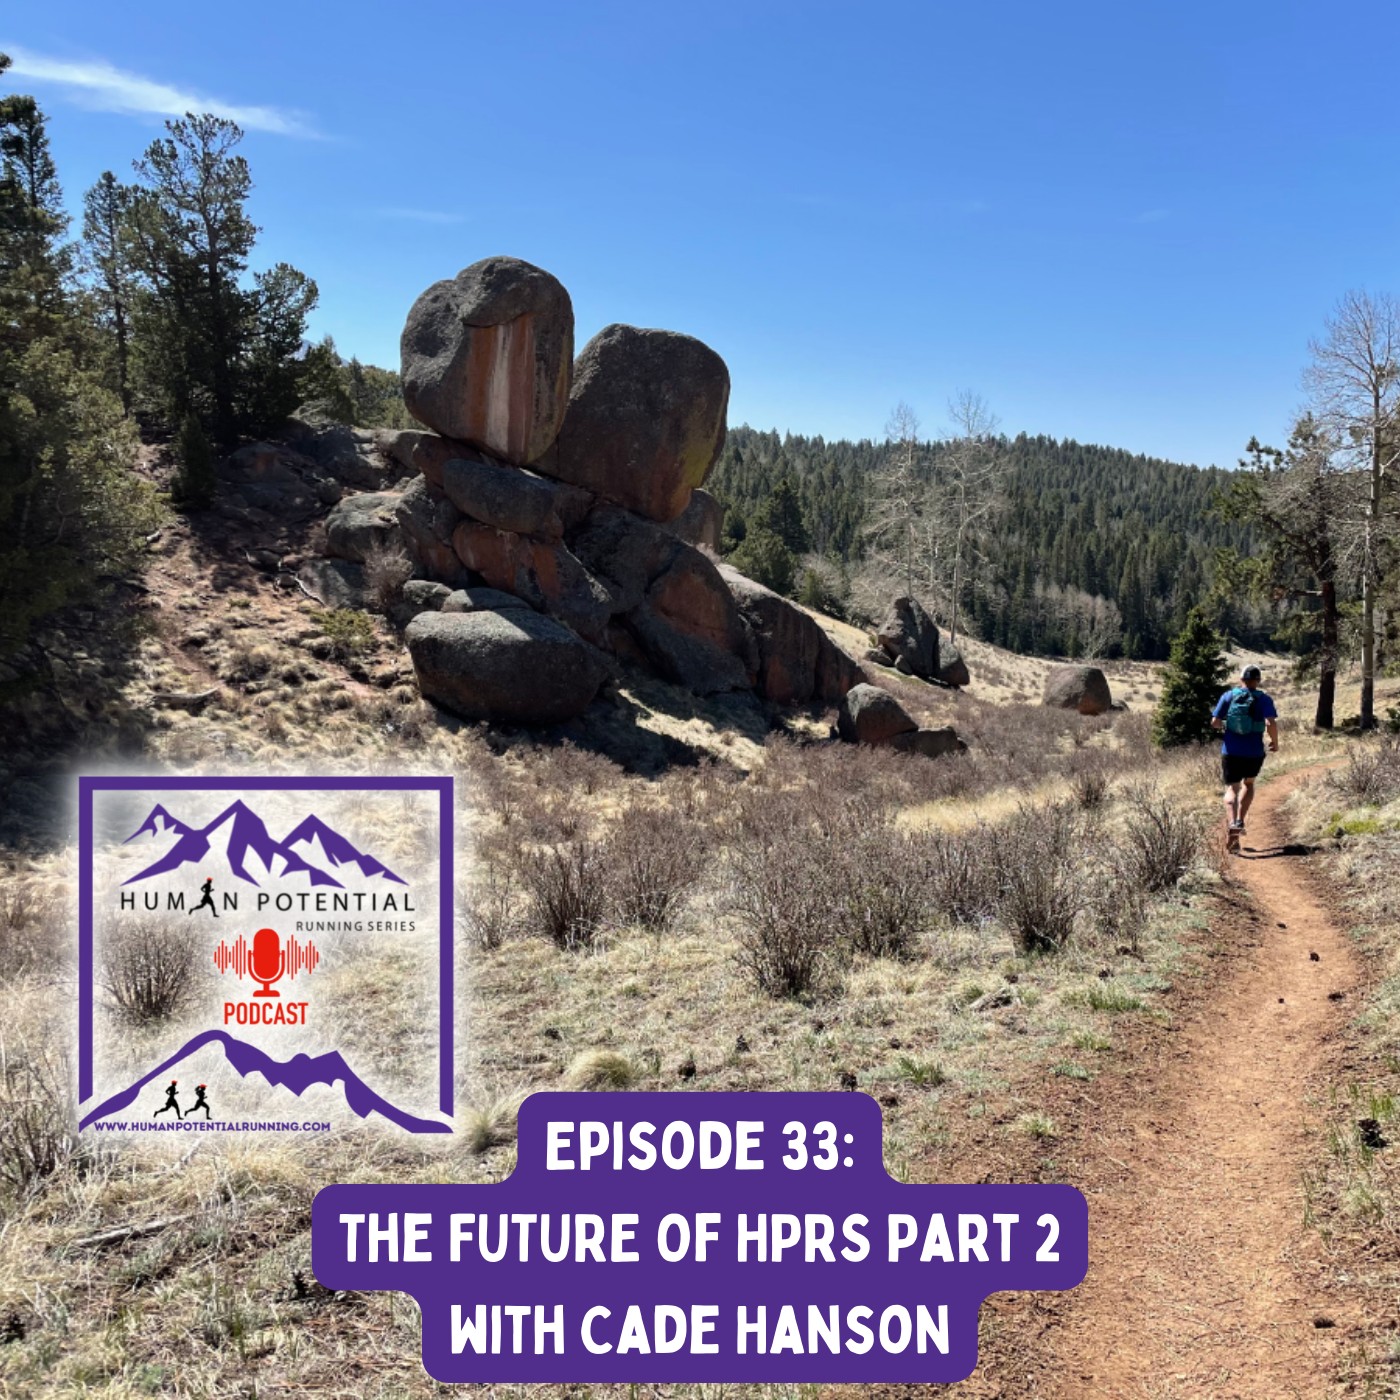 HPRS Podcast – Episode 33: The Future of HPRS Part 2 with Cade Hanson